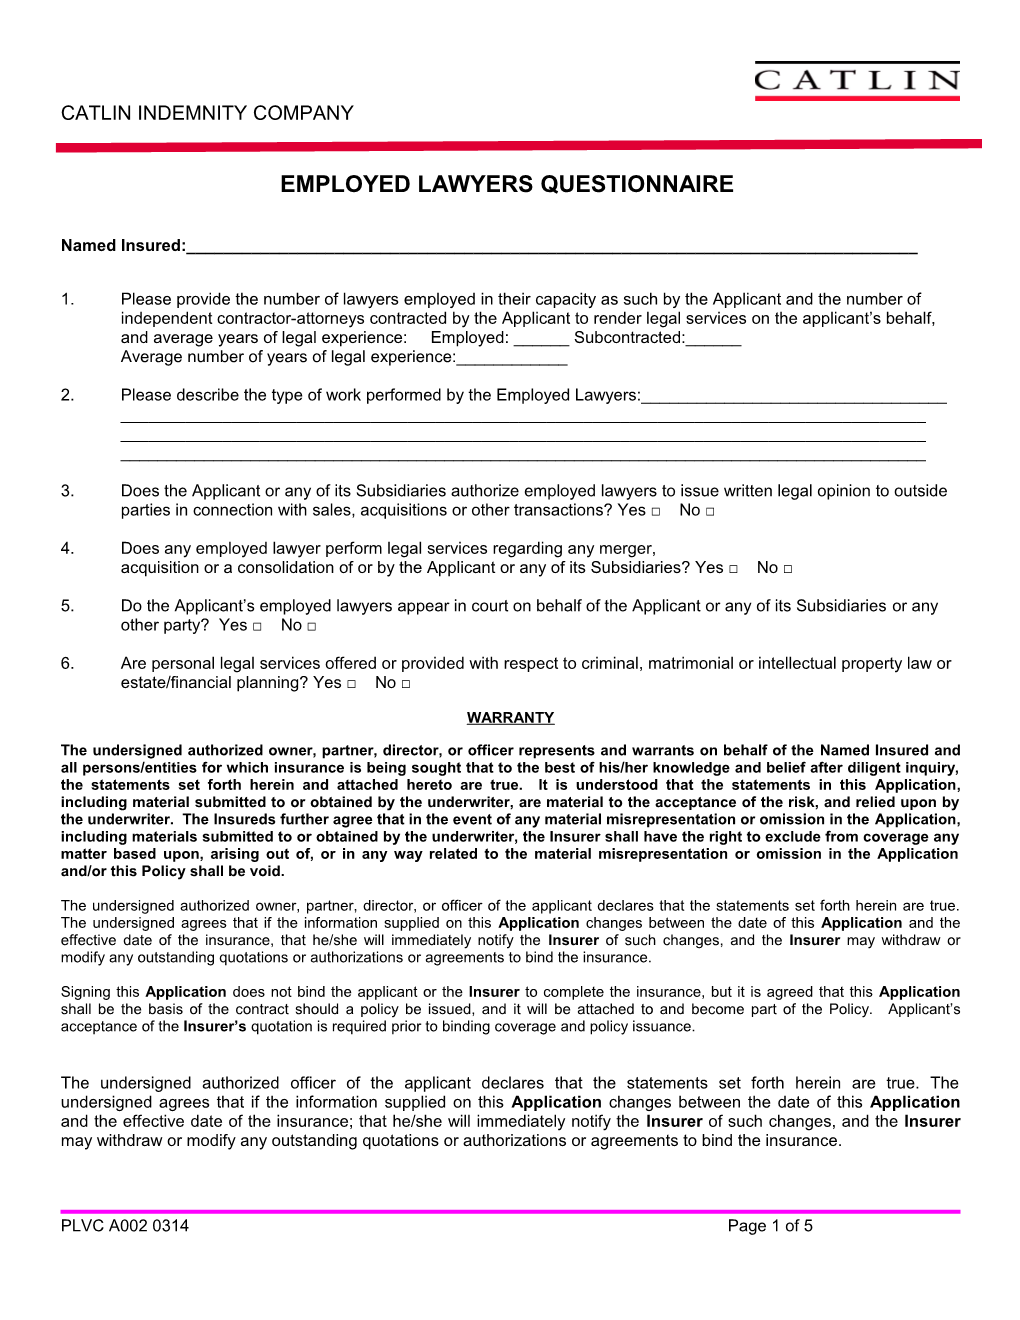 Employed Lawyers Questionnaire